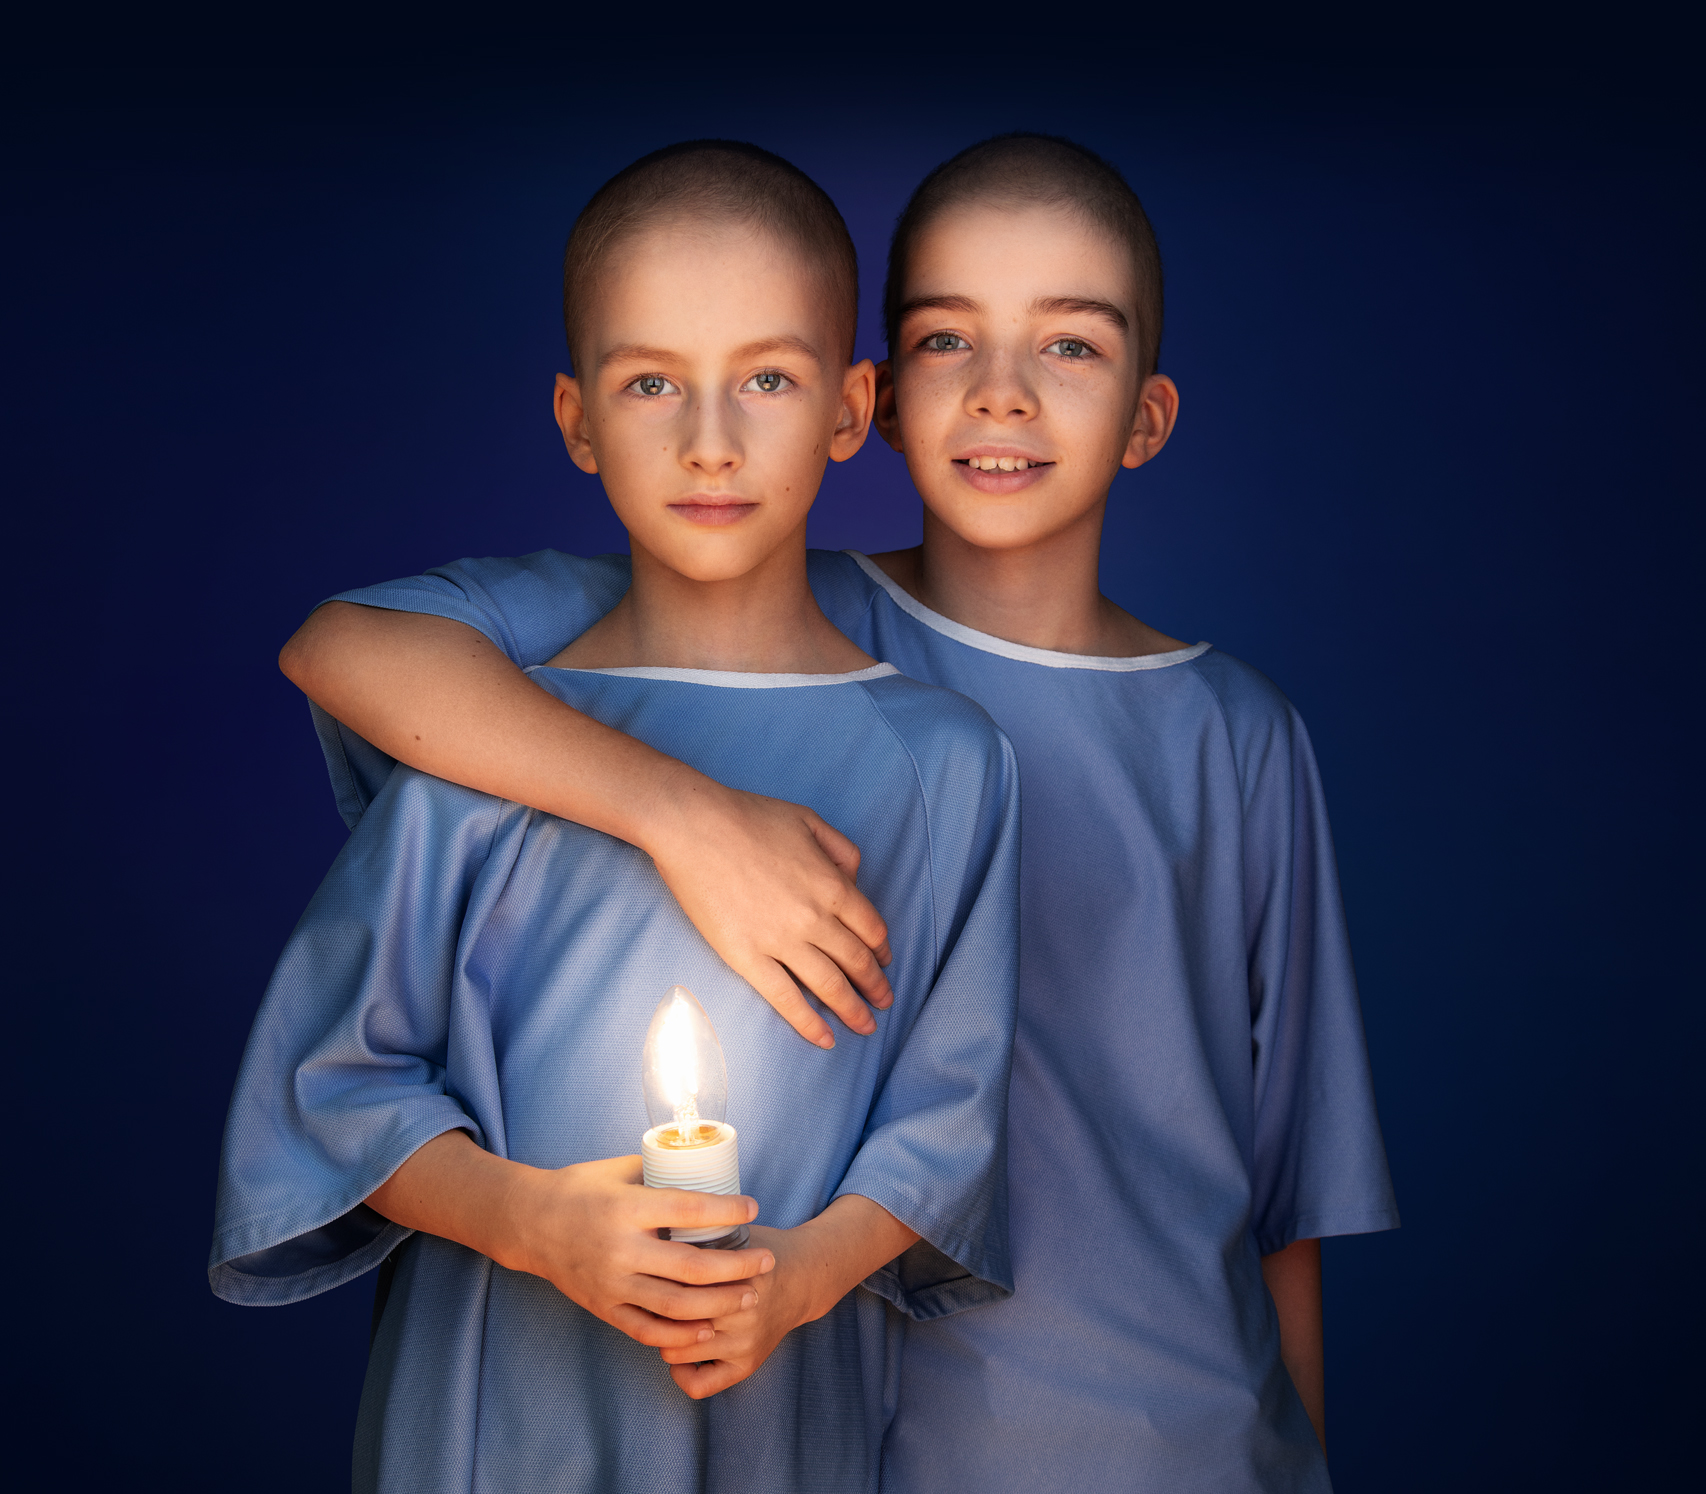 Sister Lou stands behind brother Jules with her arm wrapped around him. Both are wearing blue hospital gowns. Jules is holding a glowing candle-shaped light in his hands.